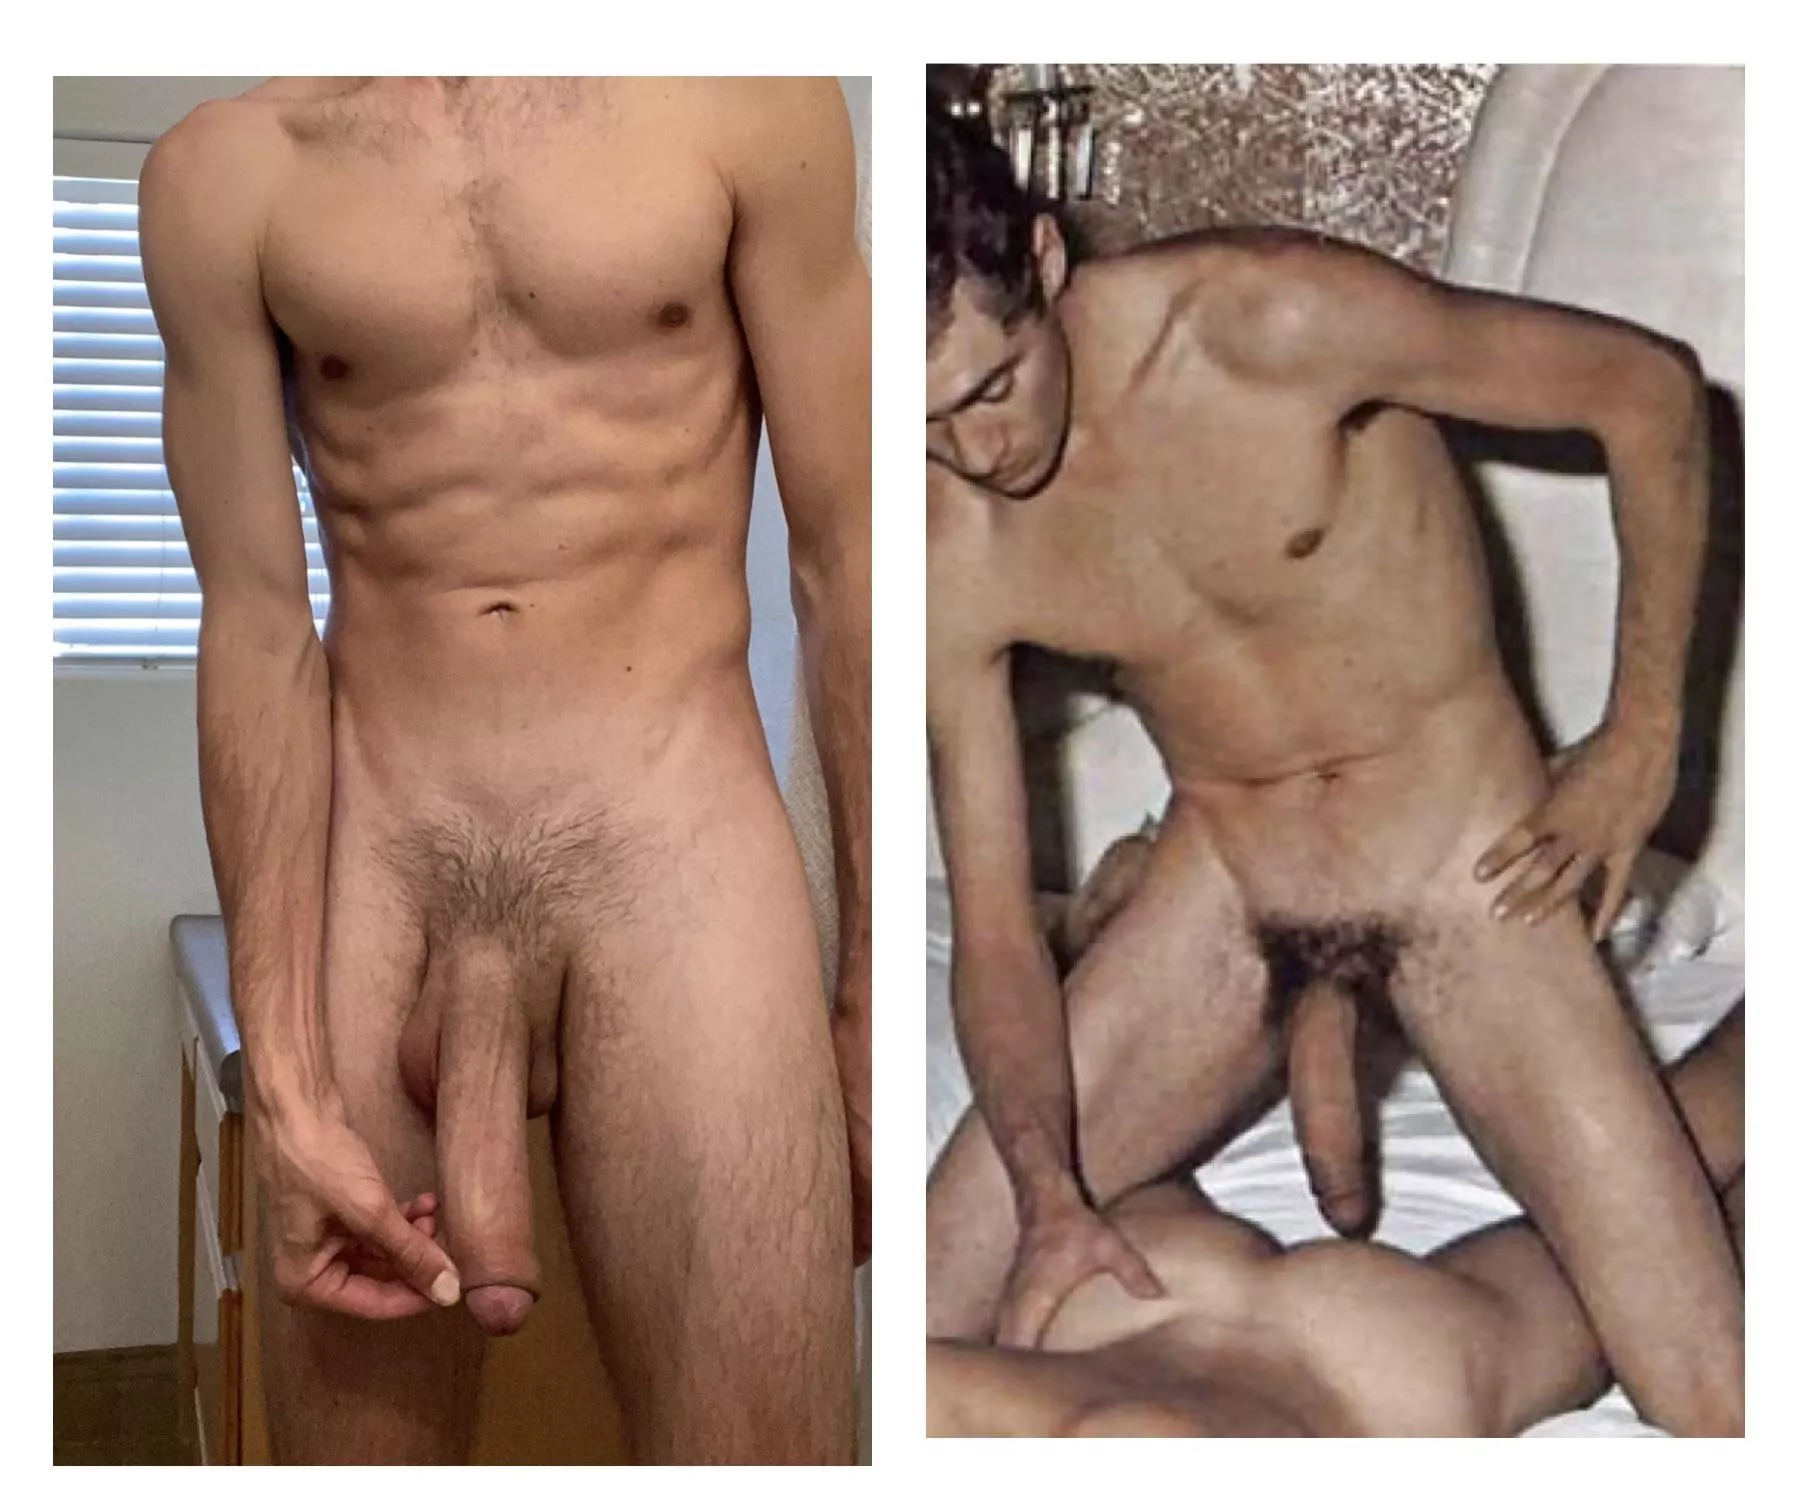 christopher thrasher recommends john holmes naked pics pic